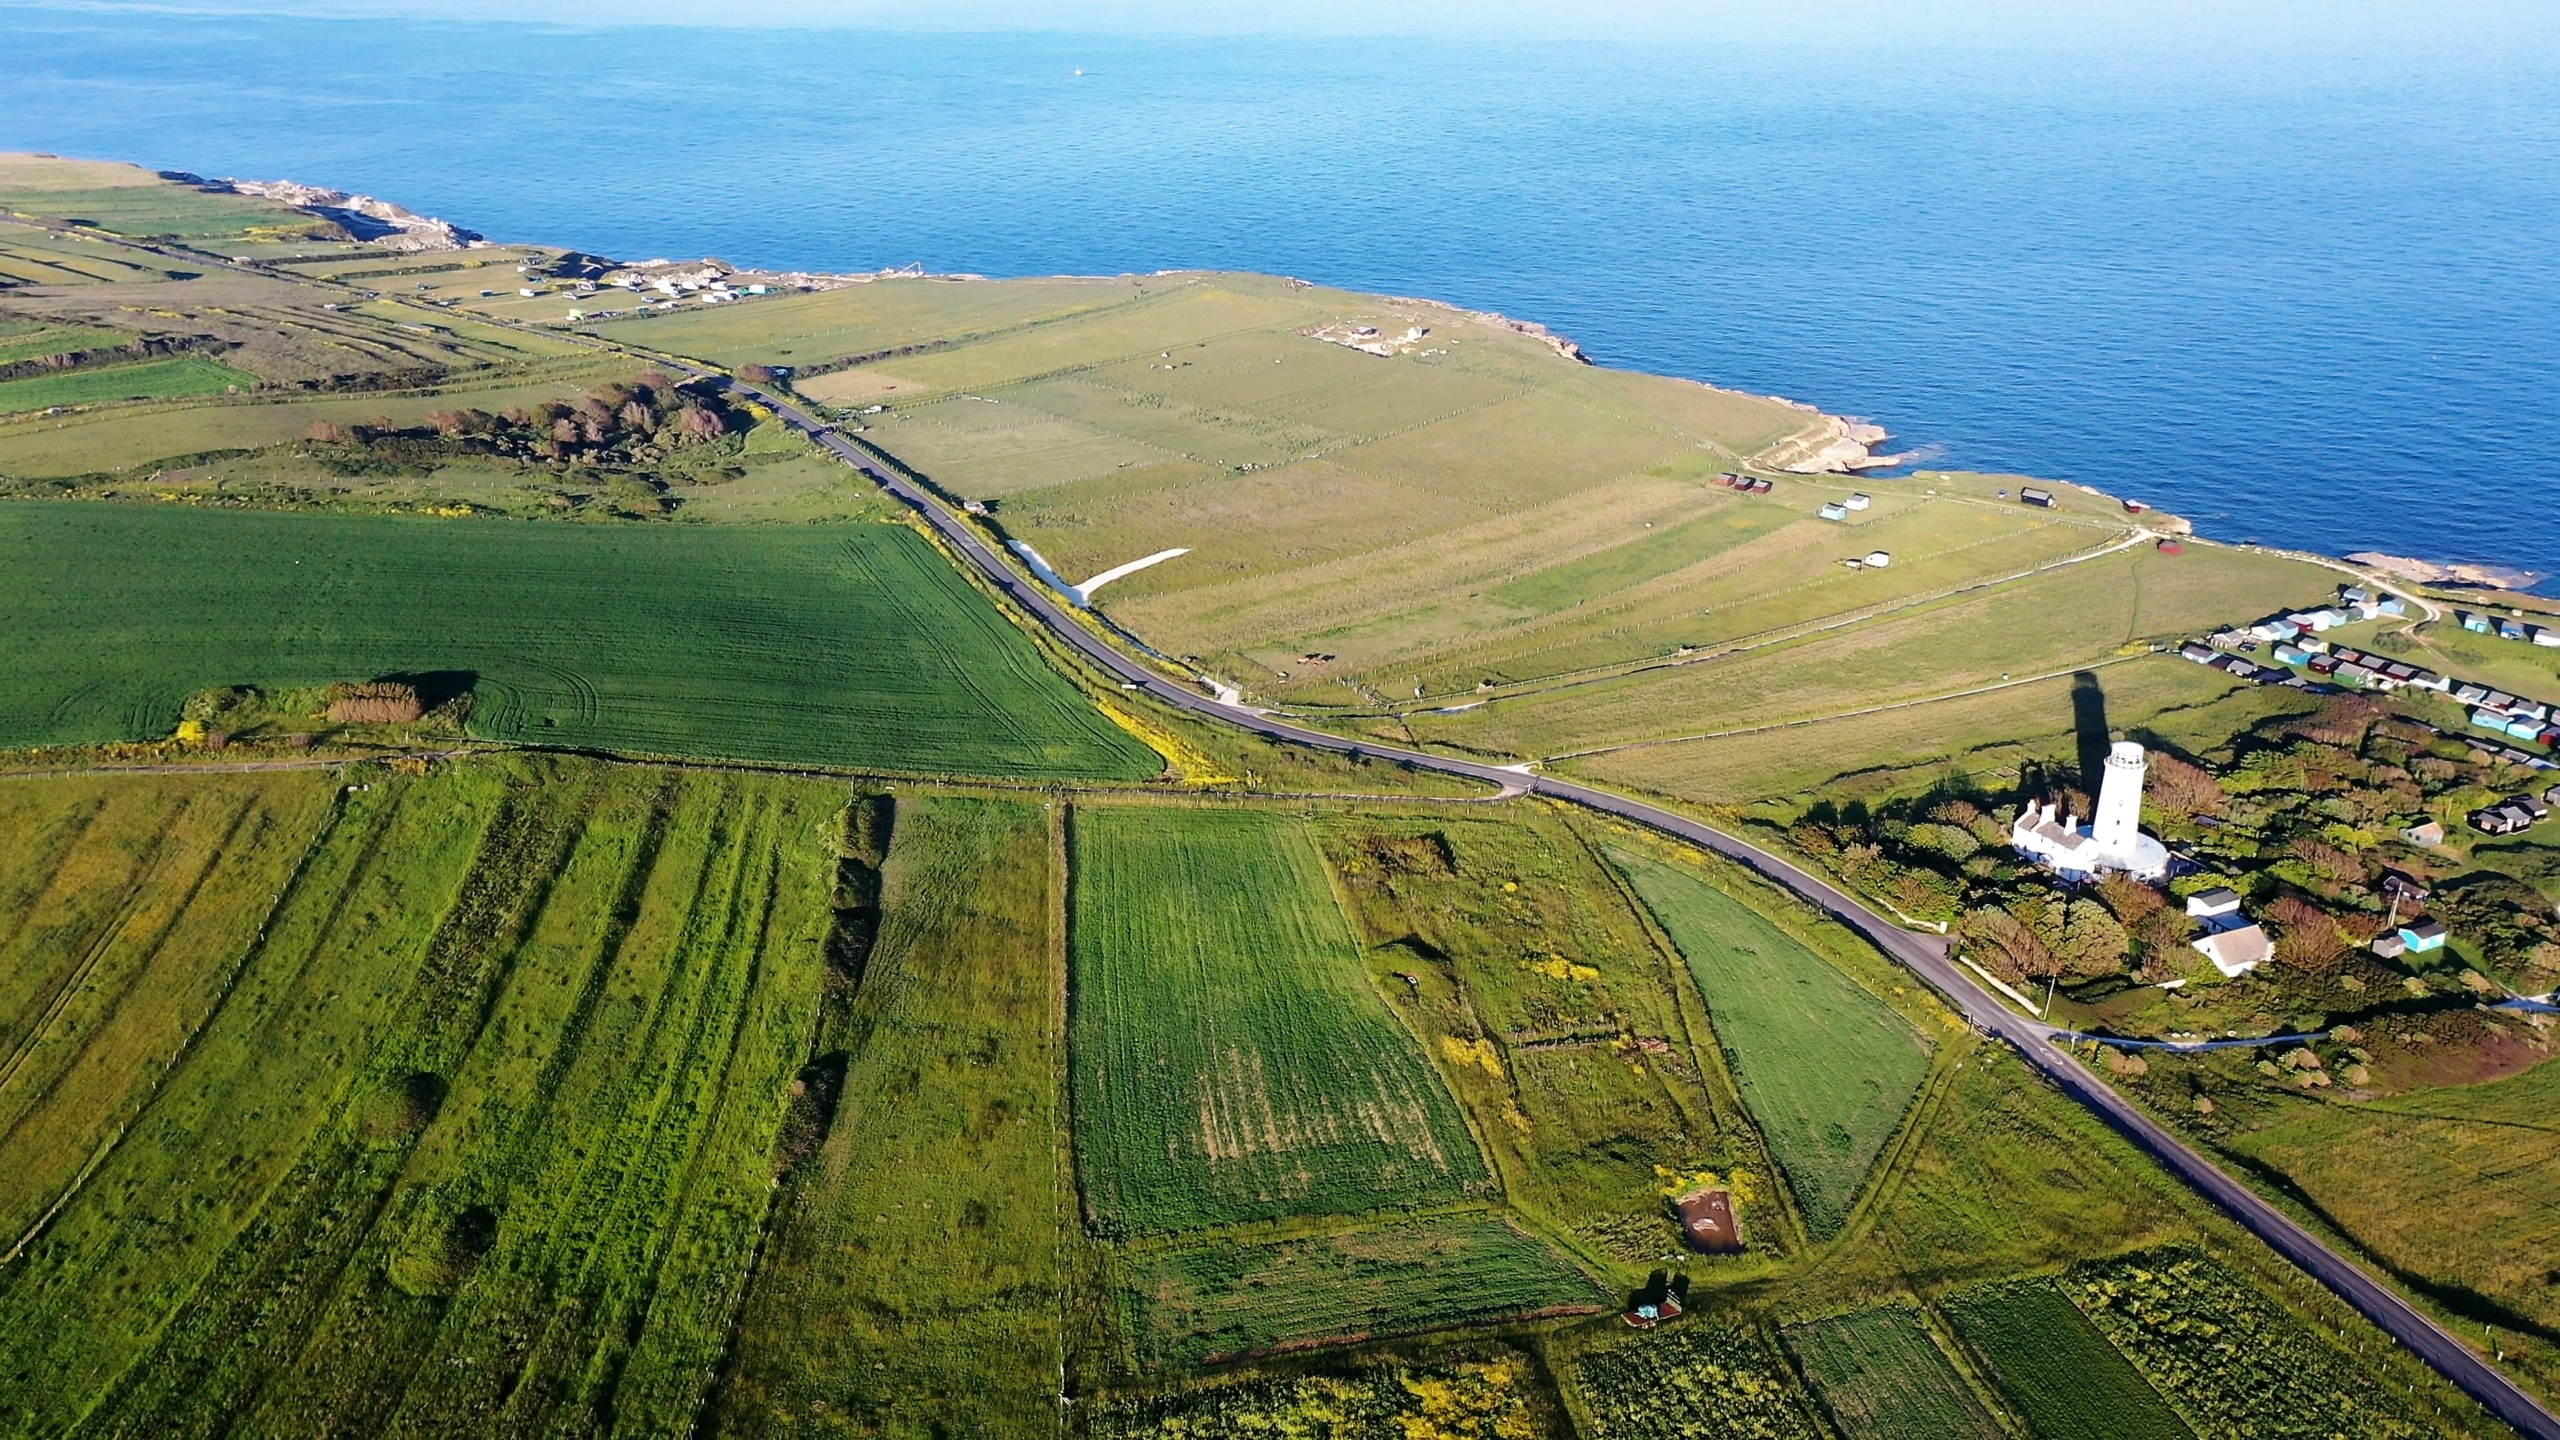 Birds eye view of a green landscape near the sea with a white lighthouse